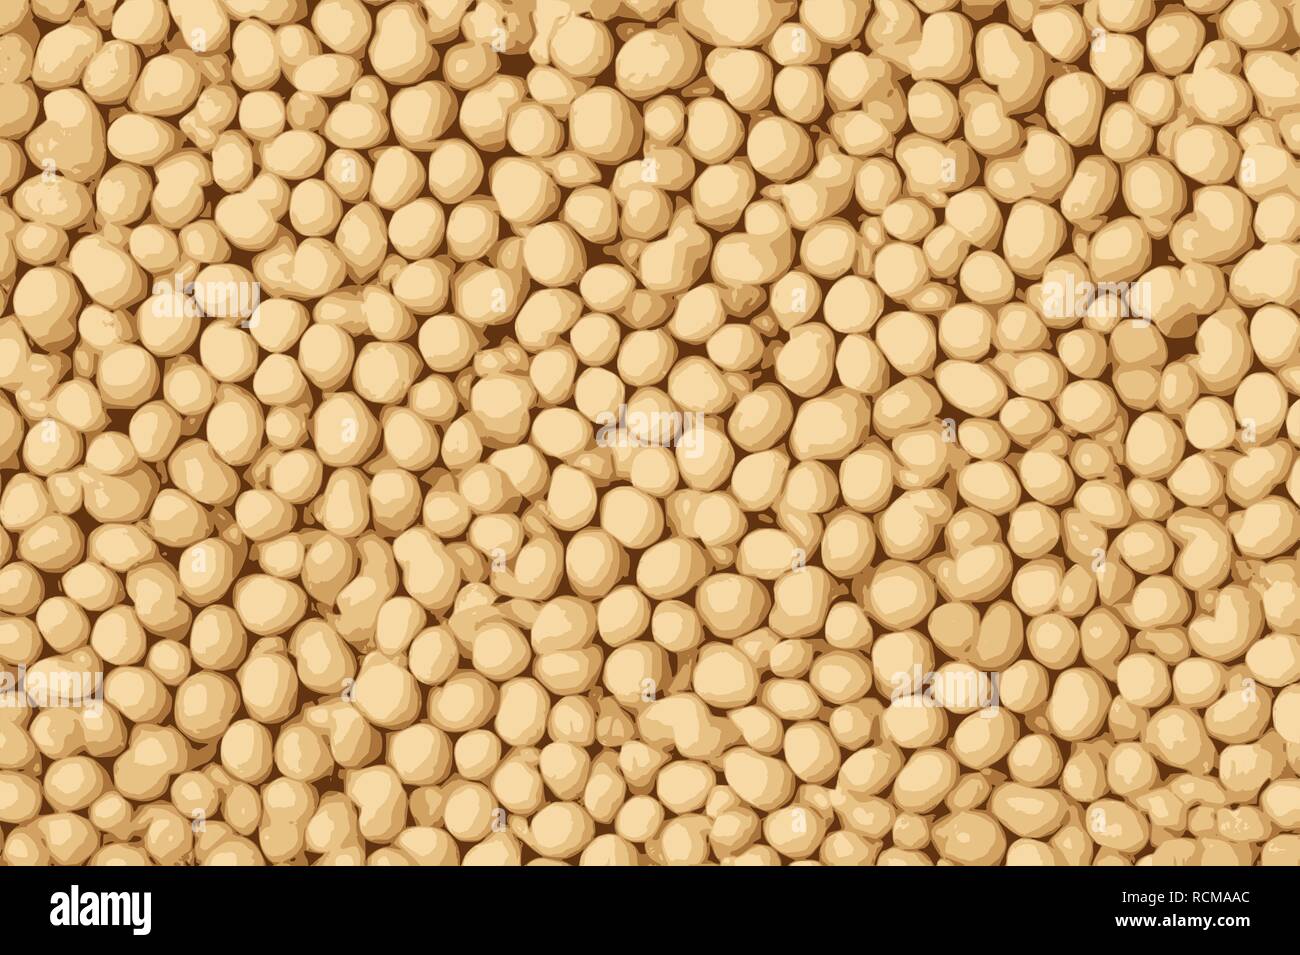 Texture of soy beans, tofu texture background Stock Photo